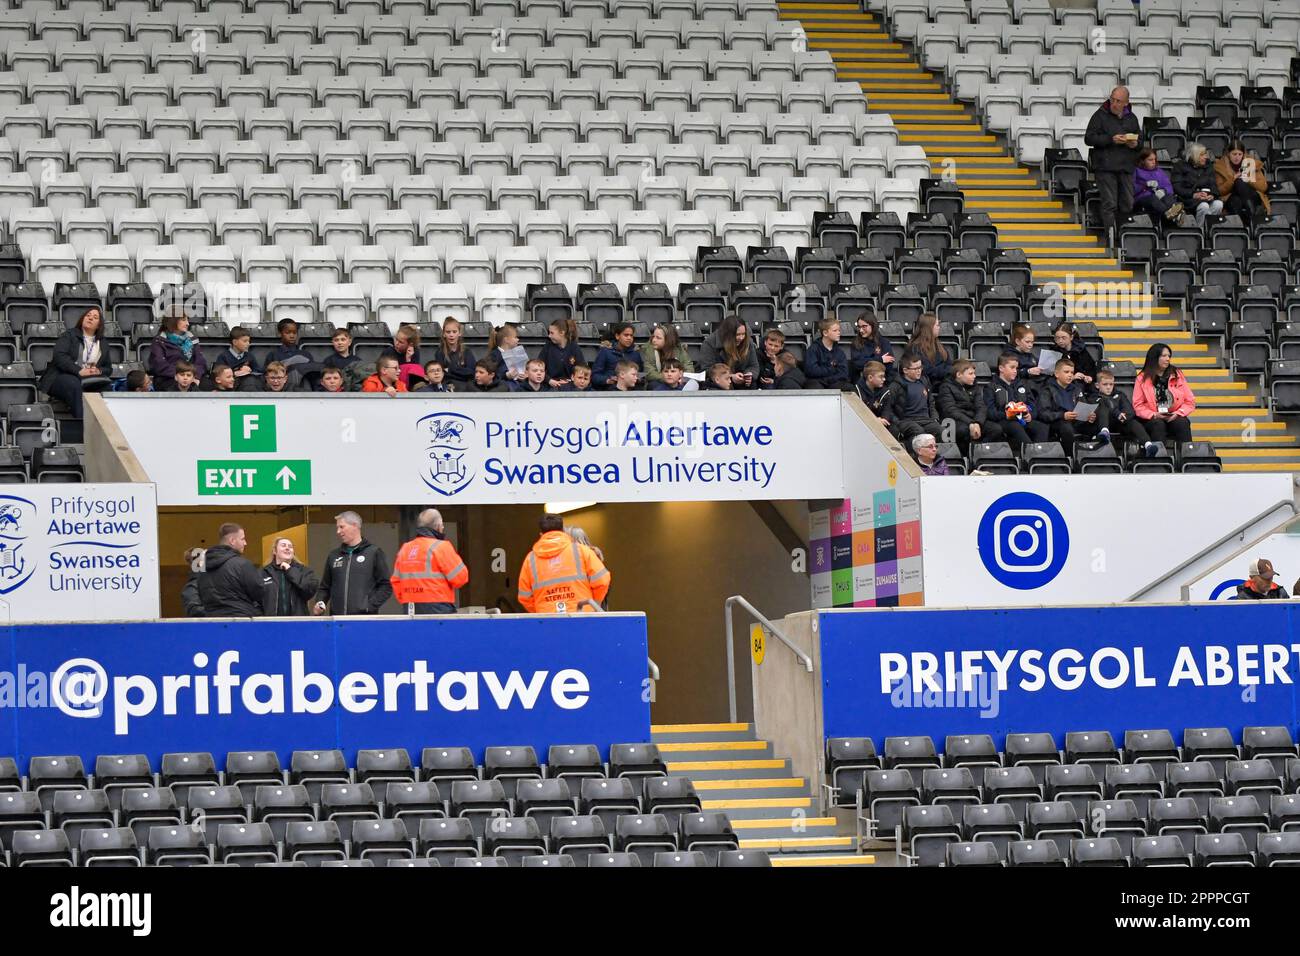 Swansea, Wales. 24 April 2023. Swansea City fans before the Professional Development League game between Swansea City Under 21 and Sheffield United Under 21 at the Swansea.com Stadium in Swansea, Wales, UK on 24 April 2023. Credit: Duncan Thomas/Majestic Media/Alamy Live News. Stock Photo